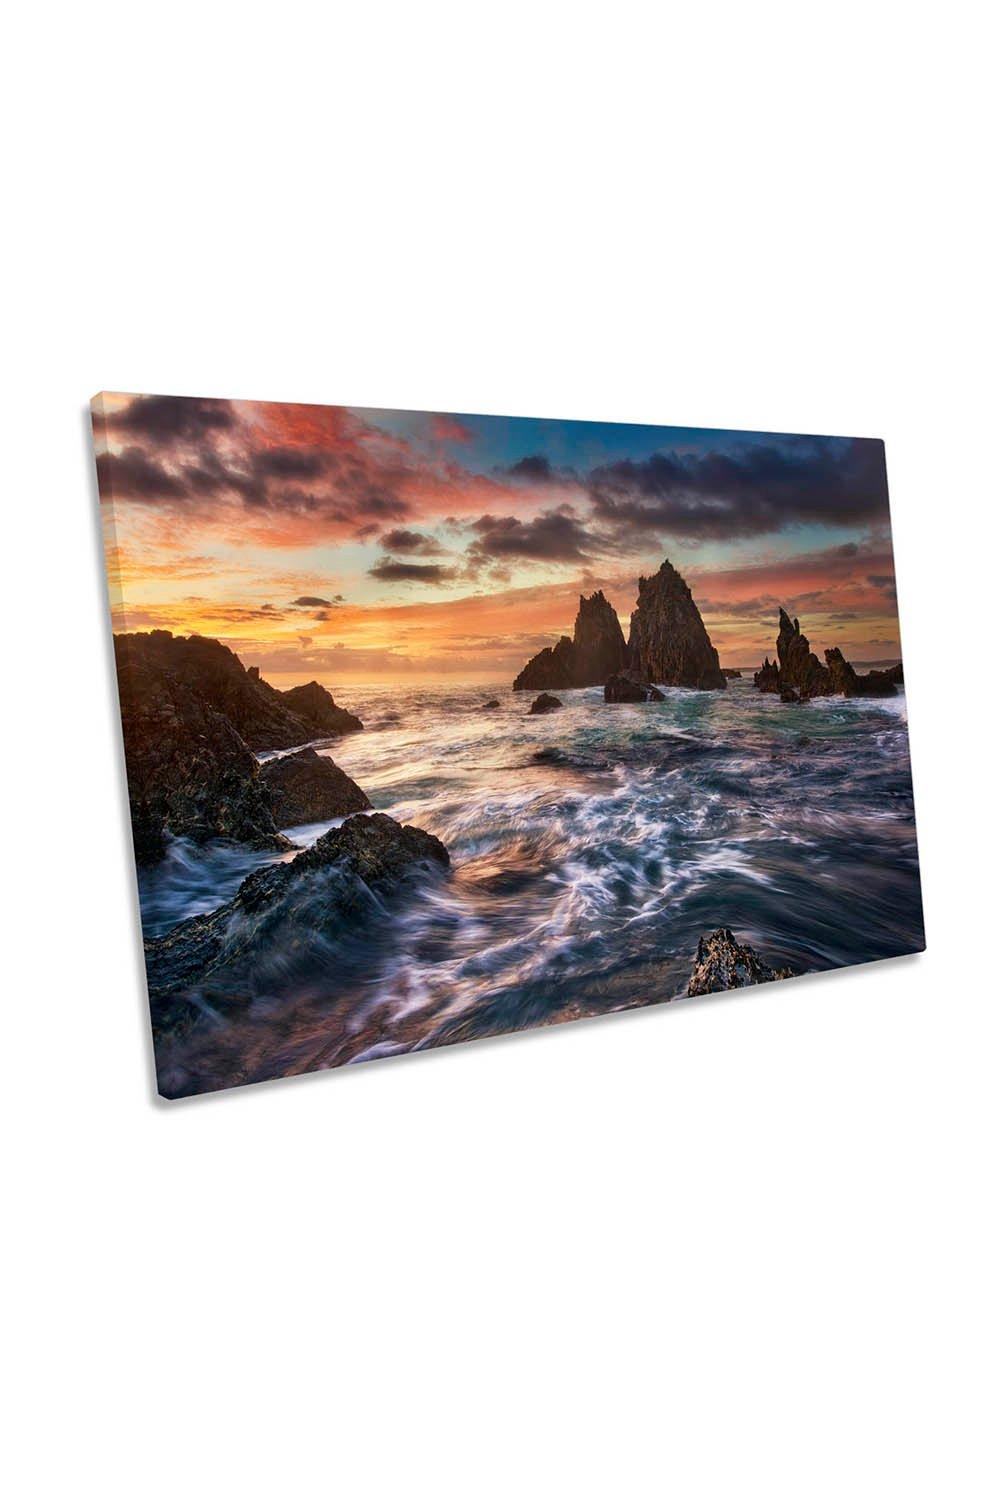 Dance with Light Seascape Rocky Coast Canvas Wall Art Picture Print